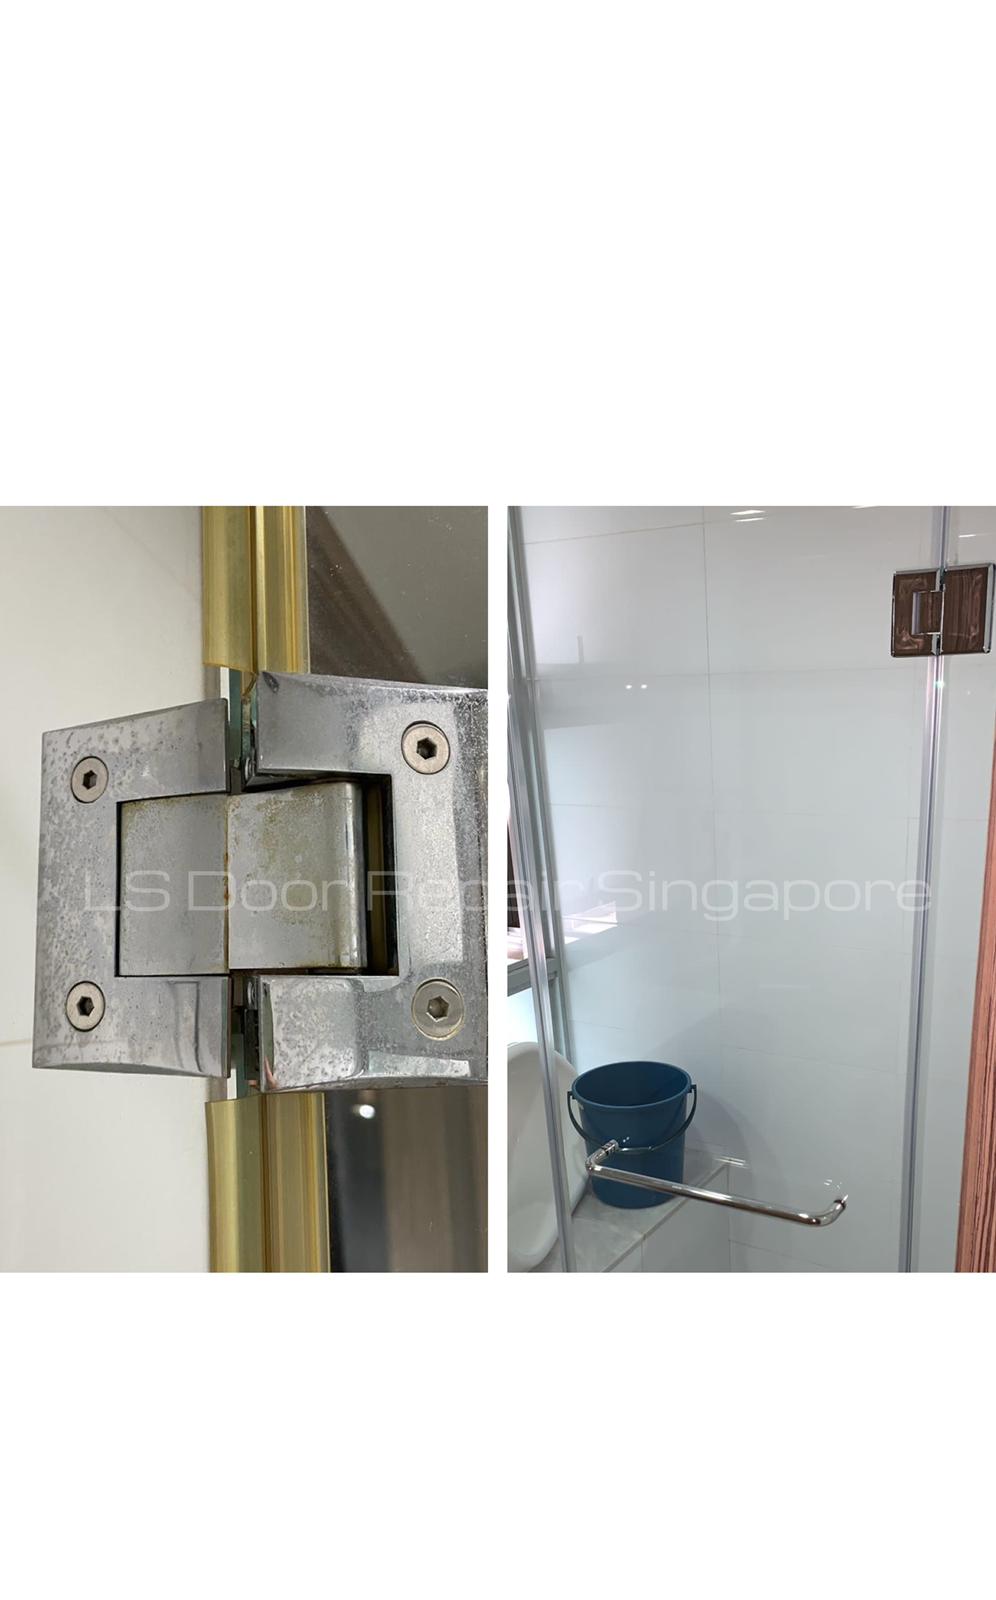 Replace Glass Door Hinges With Rubber Seal